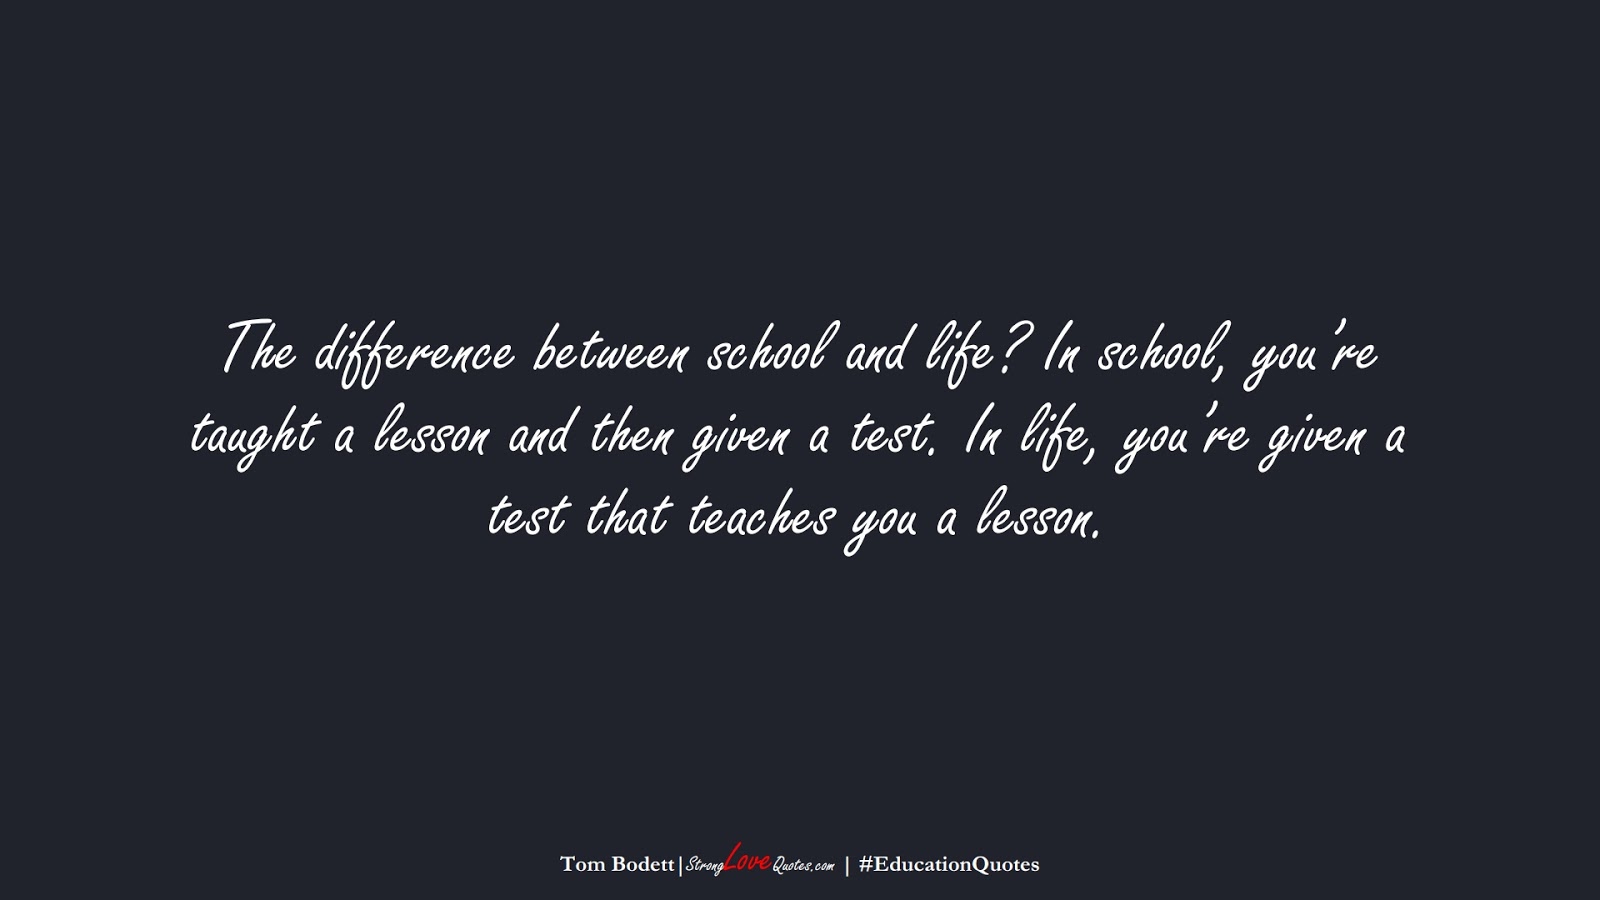 The difference between school and life? In school, you’re taught a lesson and then given a test. In life, you’re given a test that teaches you a lesson. (Tom Bodett);  #EducationQuotes